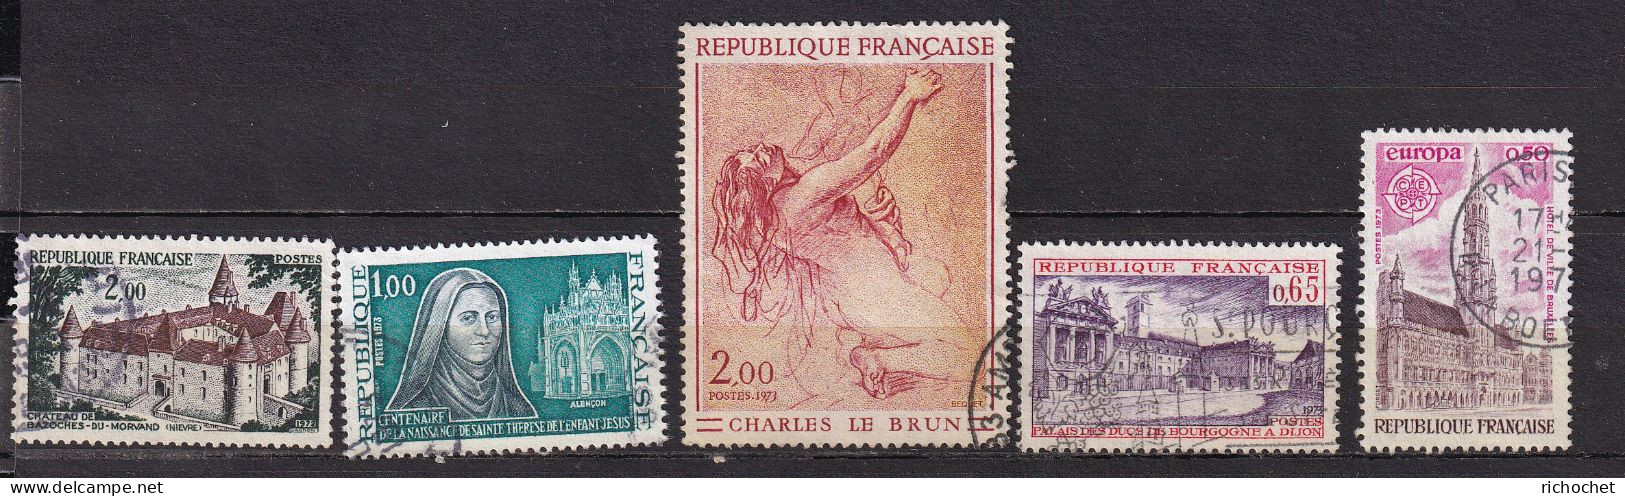 France   1726 + 1737 + 1742 + 1752 + 1757 ° - Used Stamps